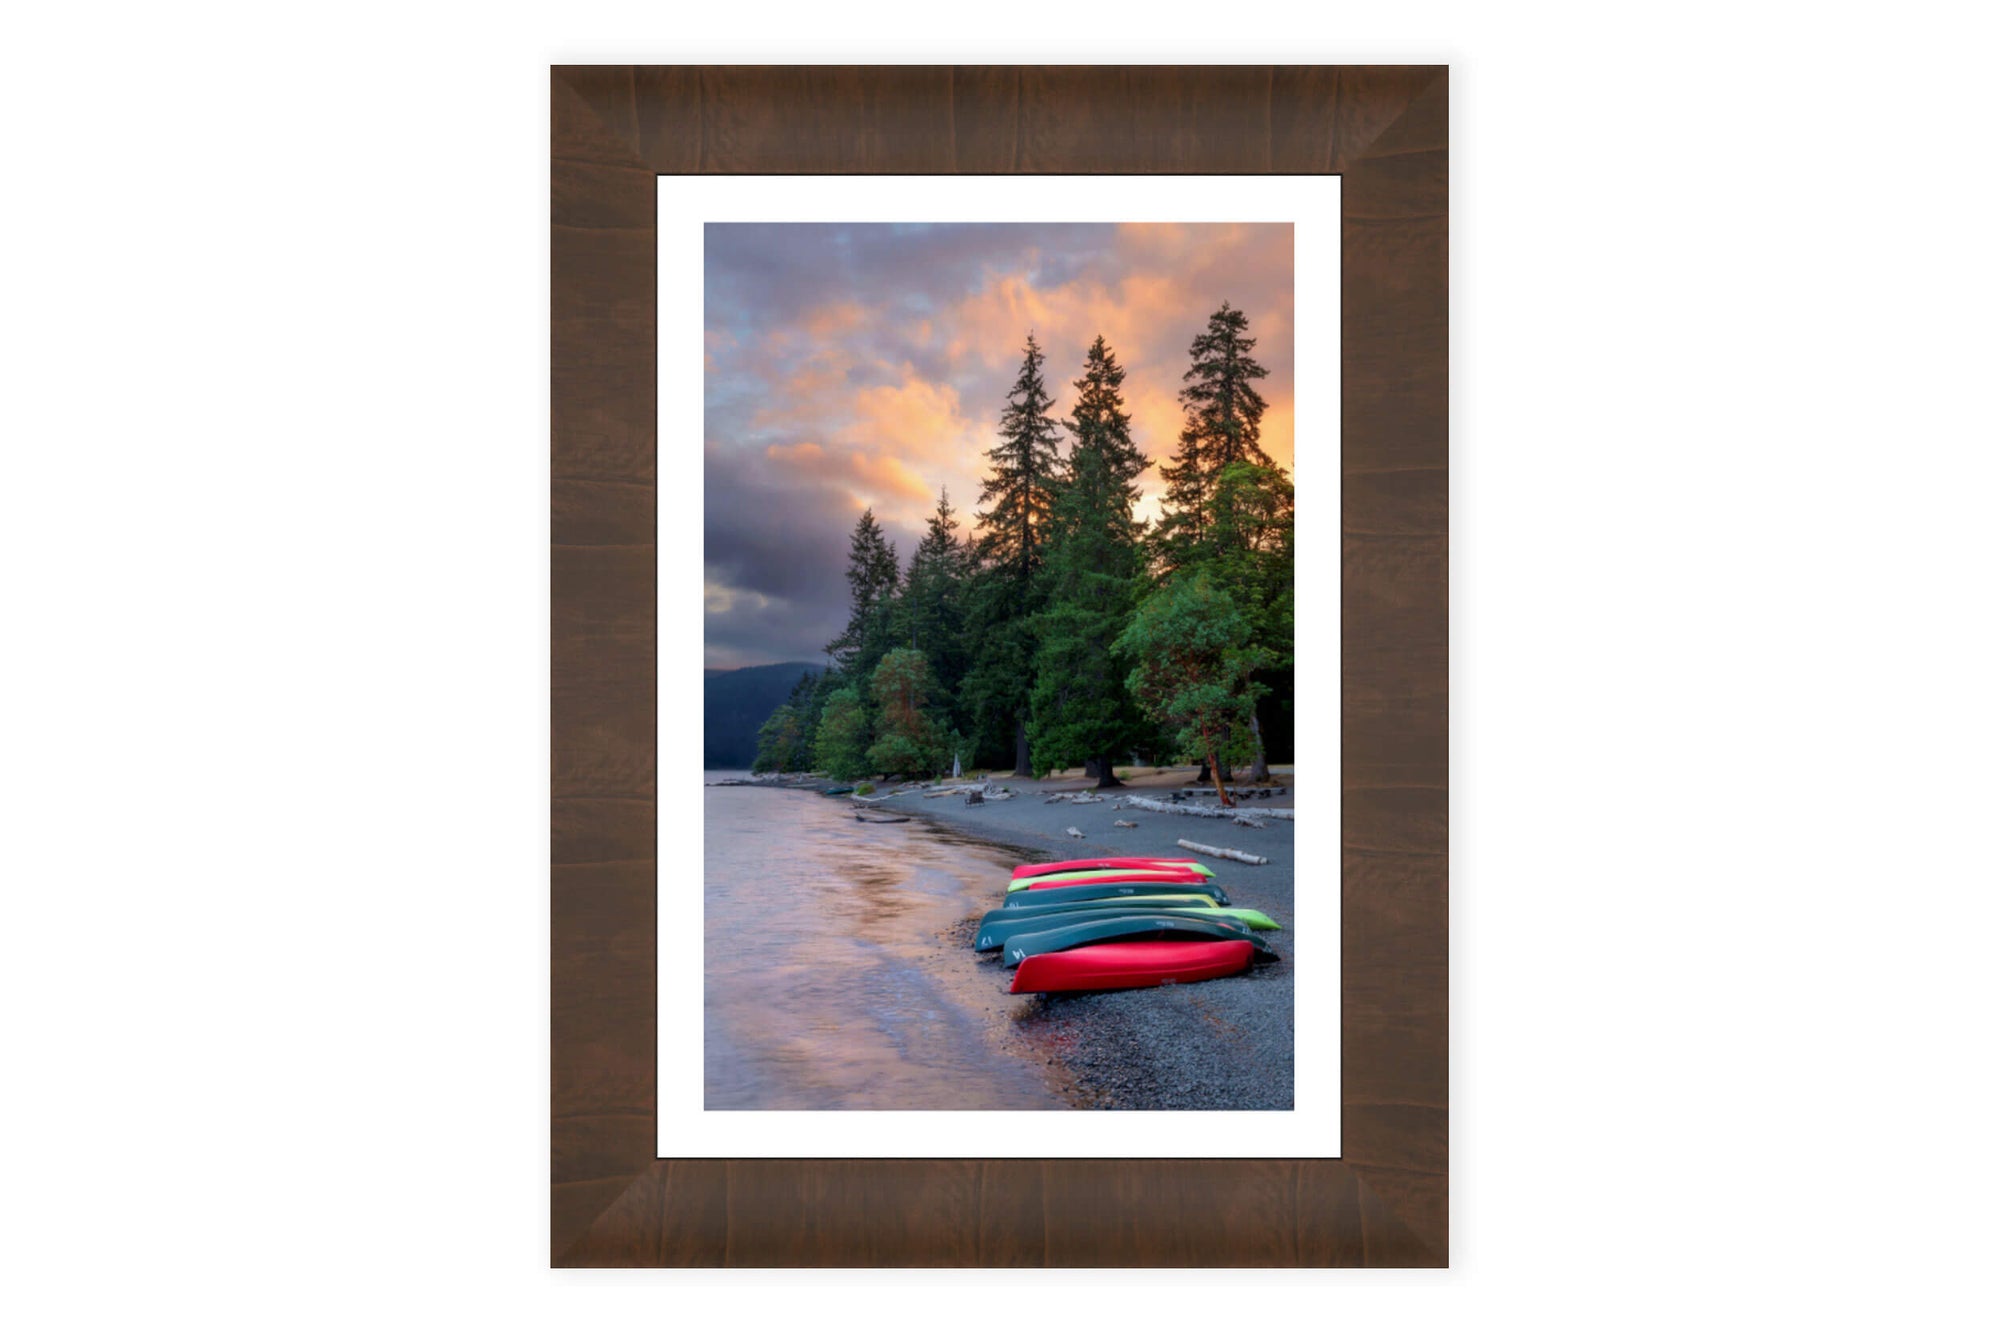 A framed Crescent Lake picture from Washington.